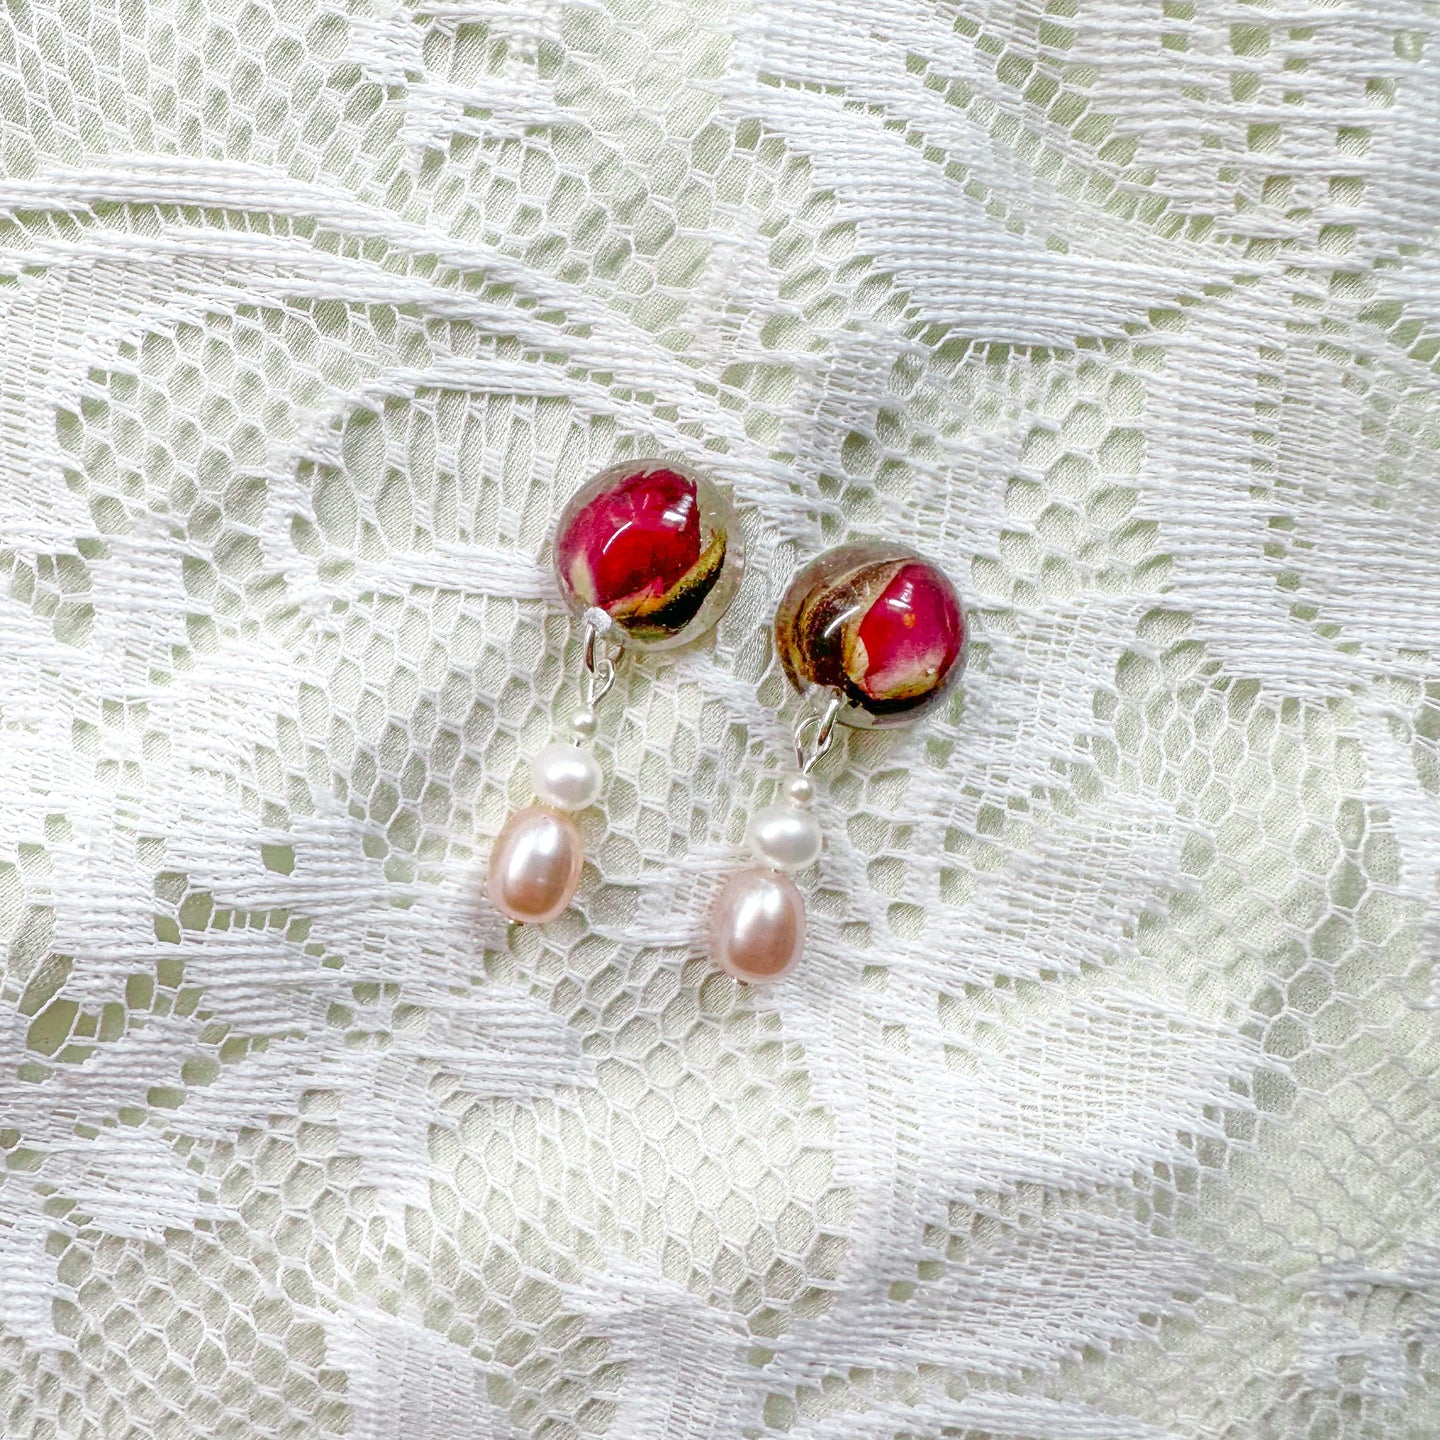 Rose bud studs with pearl drops